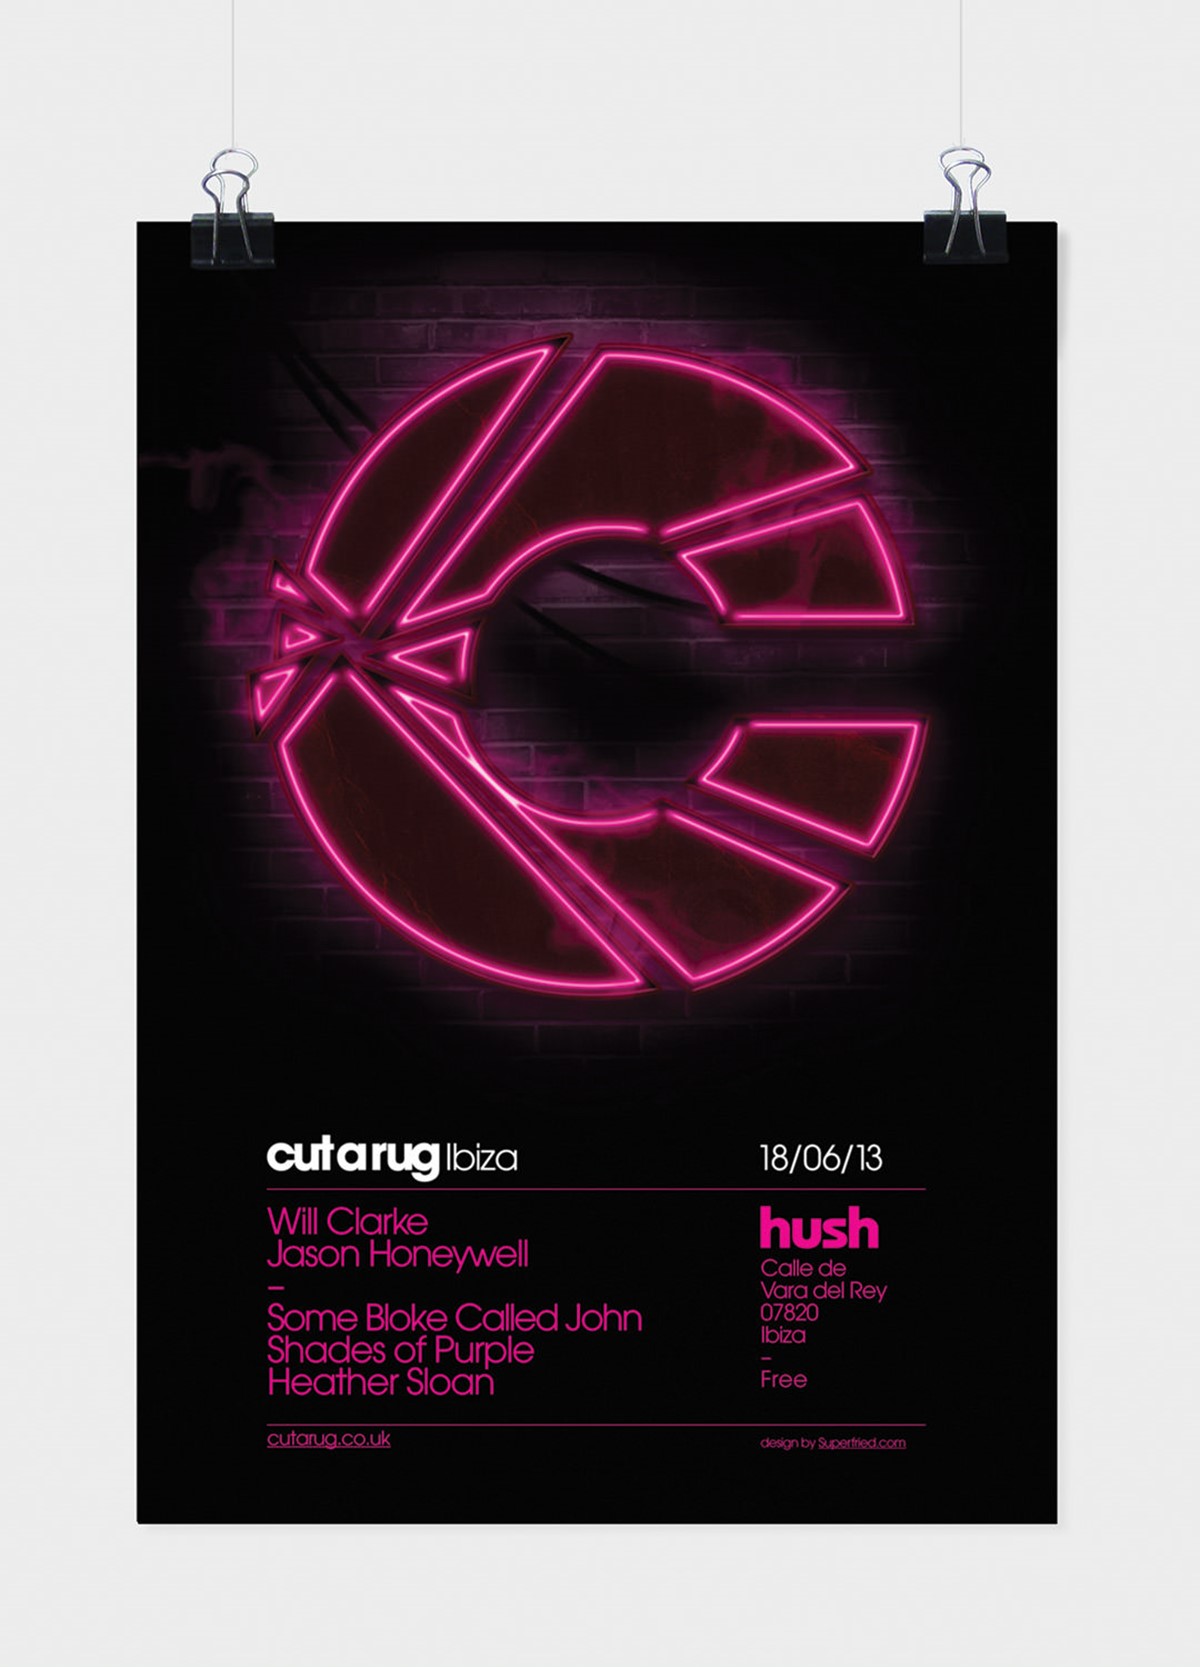 Cut a Rug. Neon style C logo Ibiza club night poster. Design by Superfried. Manchester.